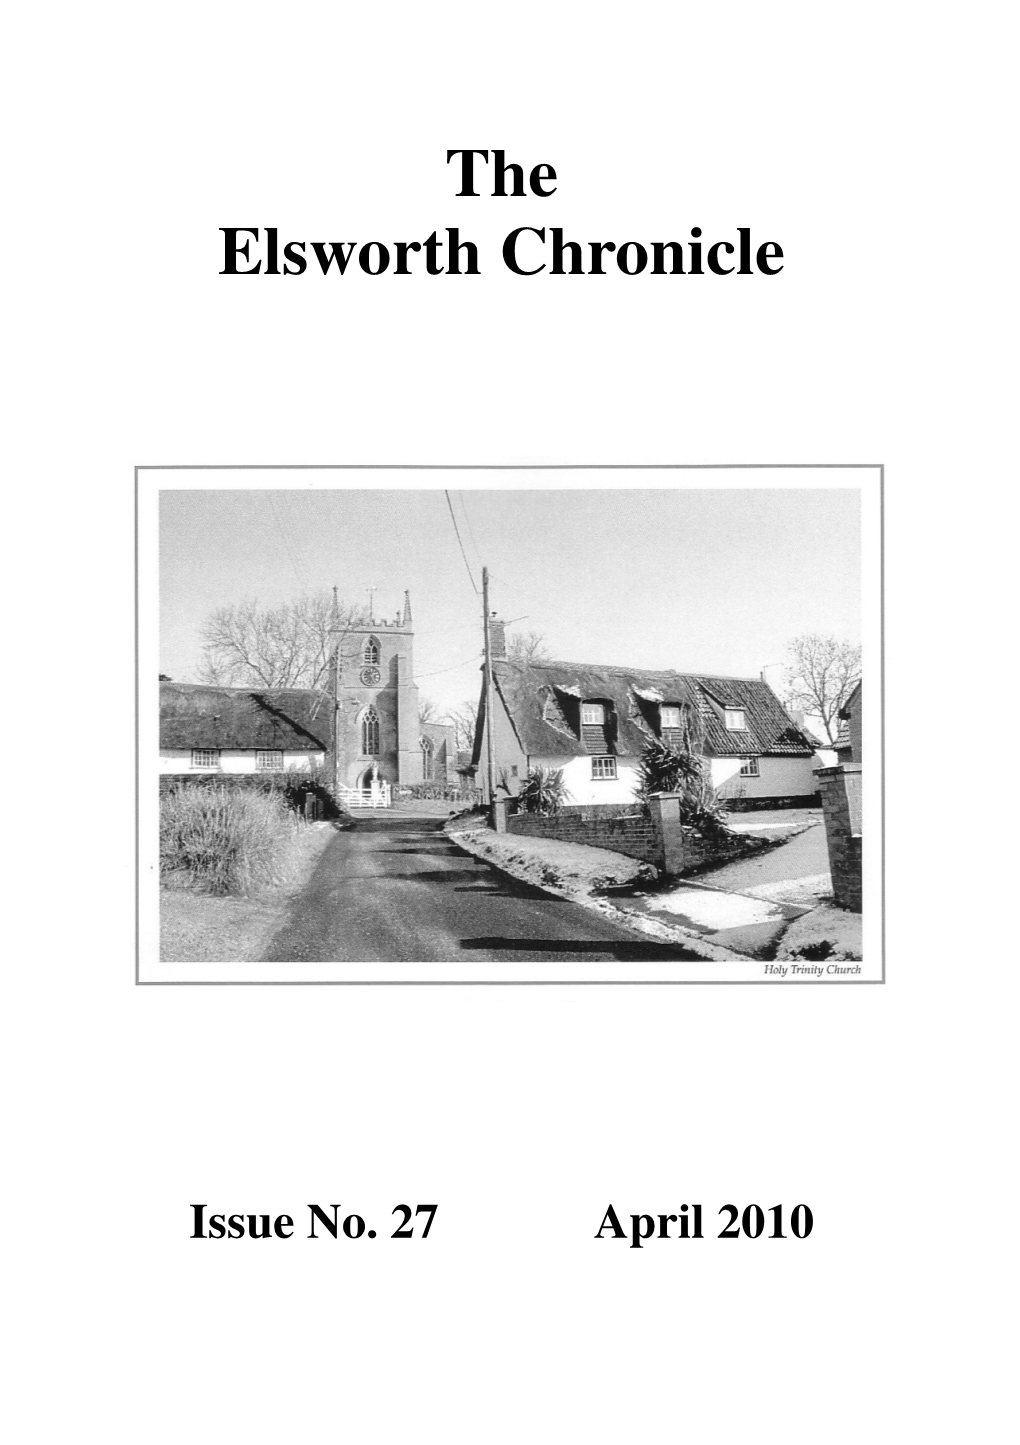 Elsworth Chronicle Issue 27 April 2010